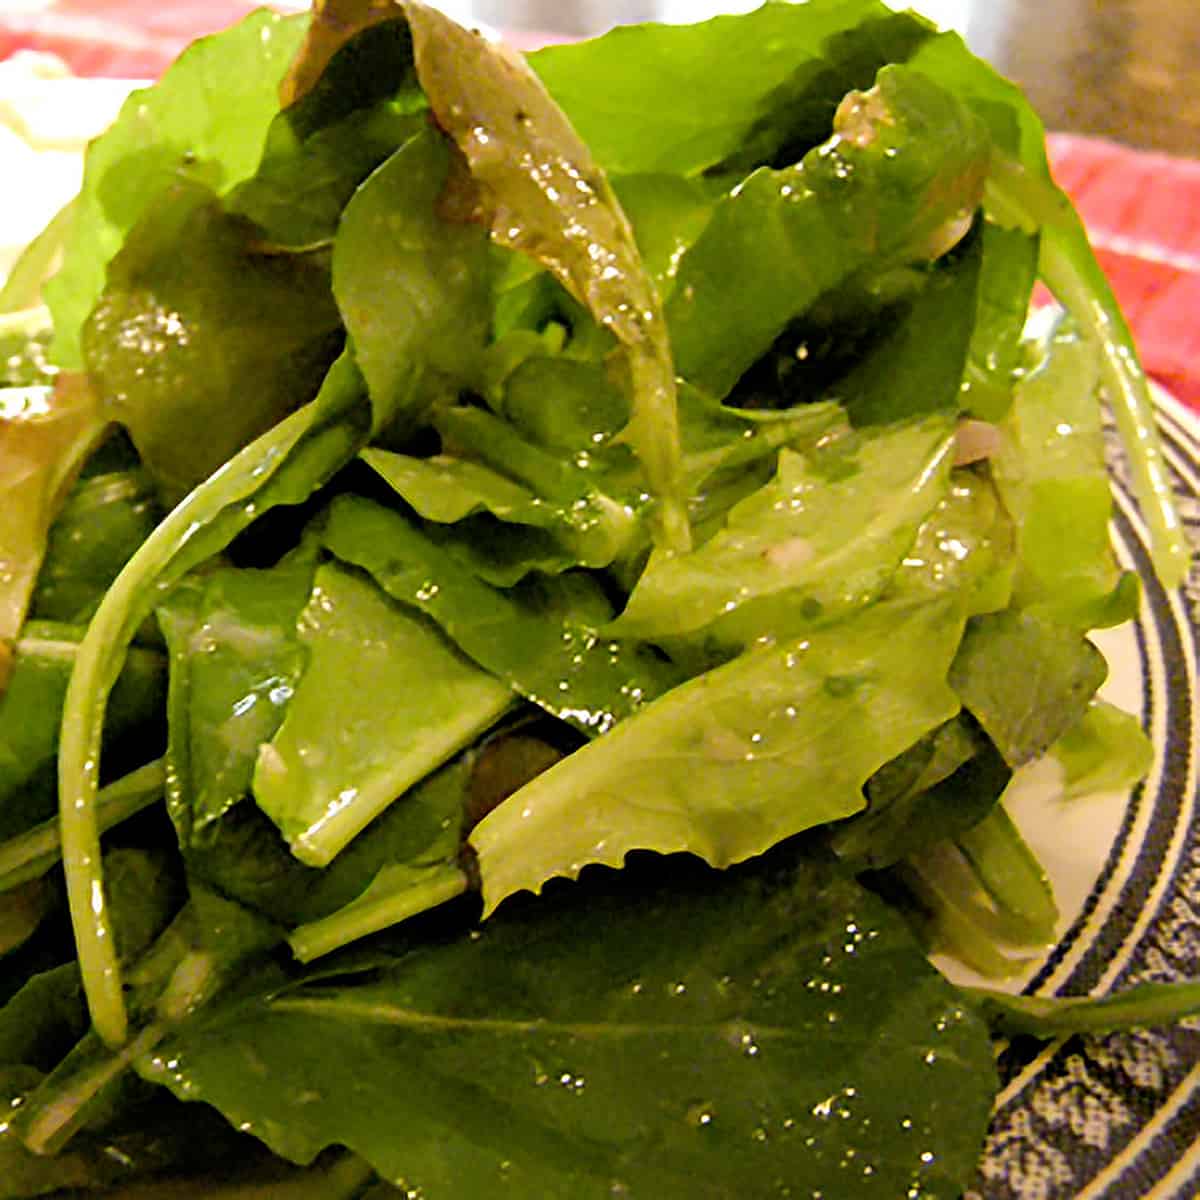 Fresh salad greens tossed with class vinaigrette dressing.